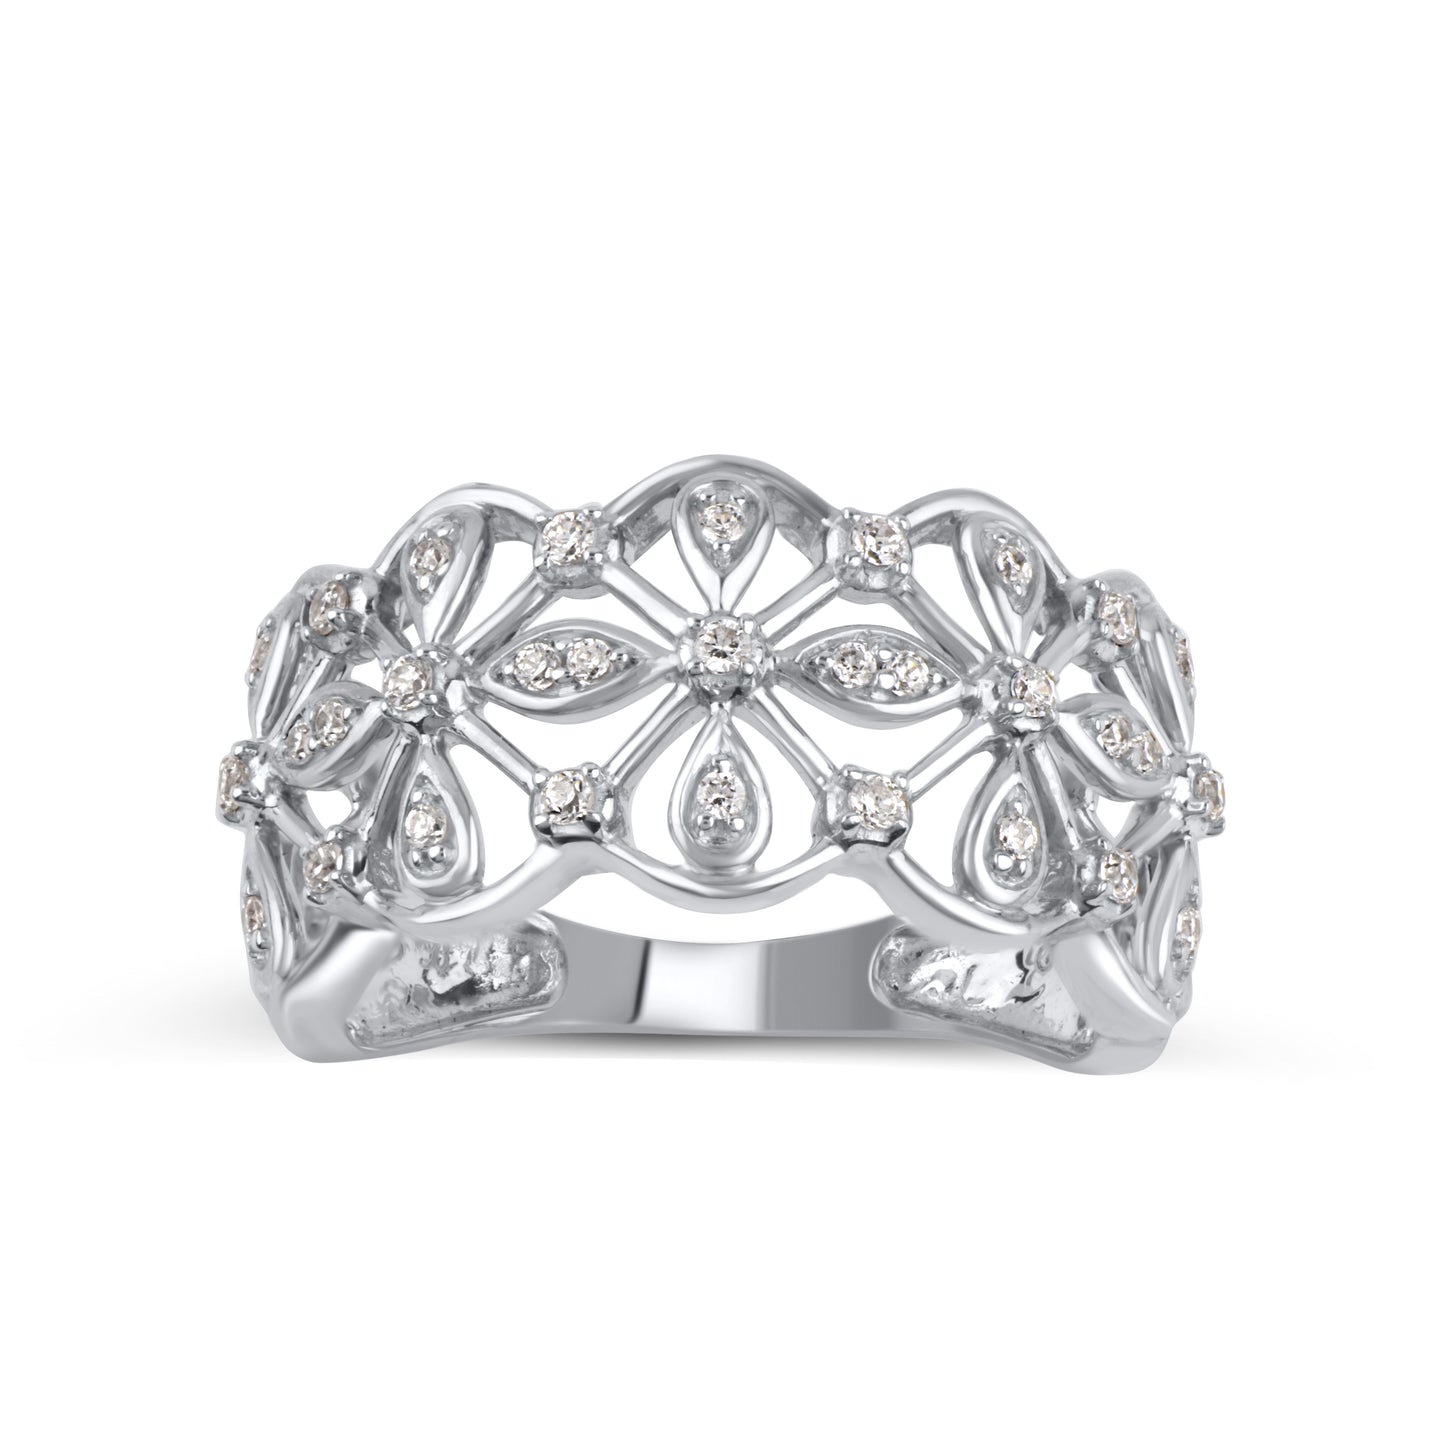 Floral Band Ring